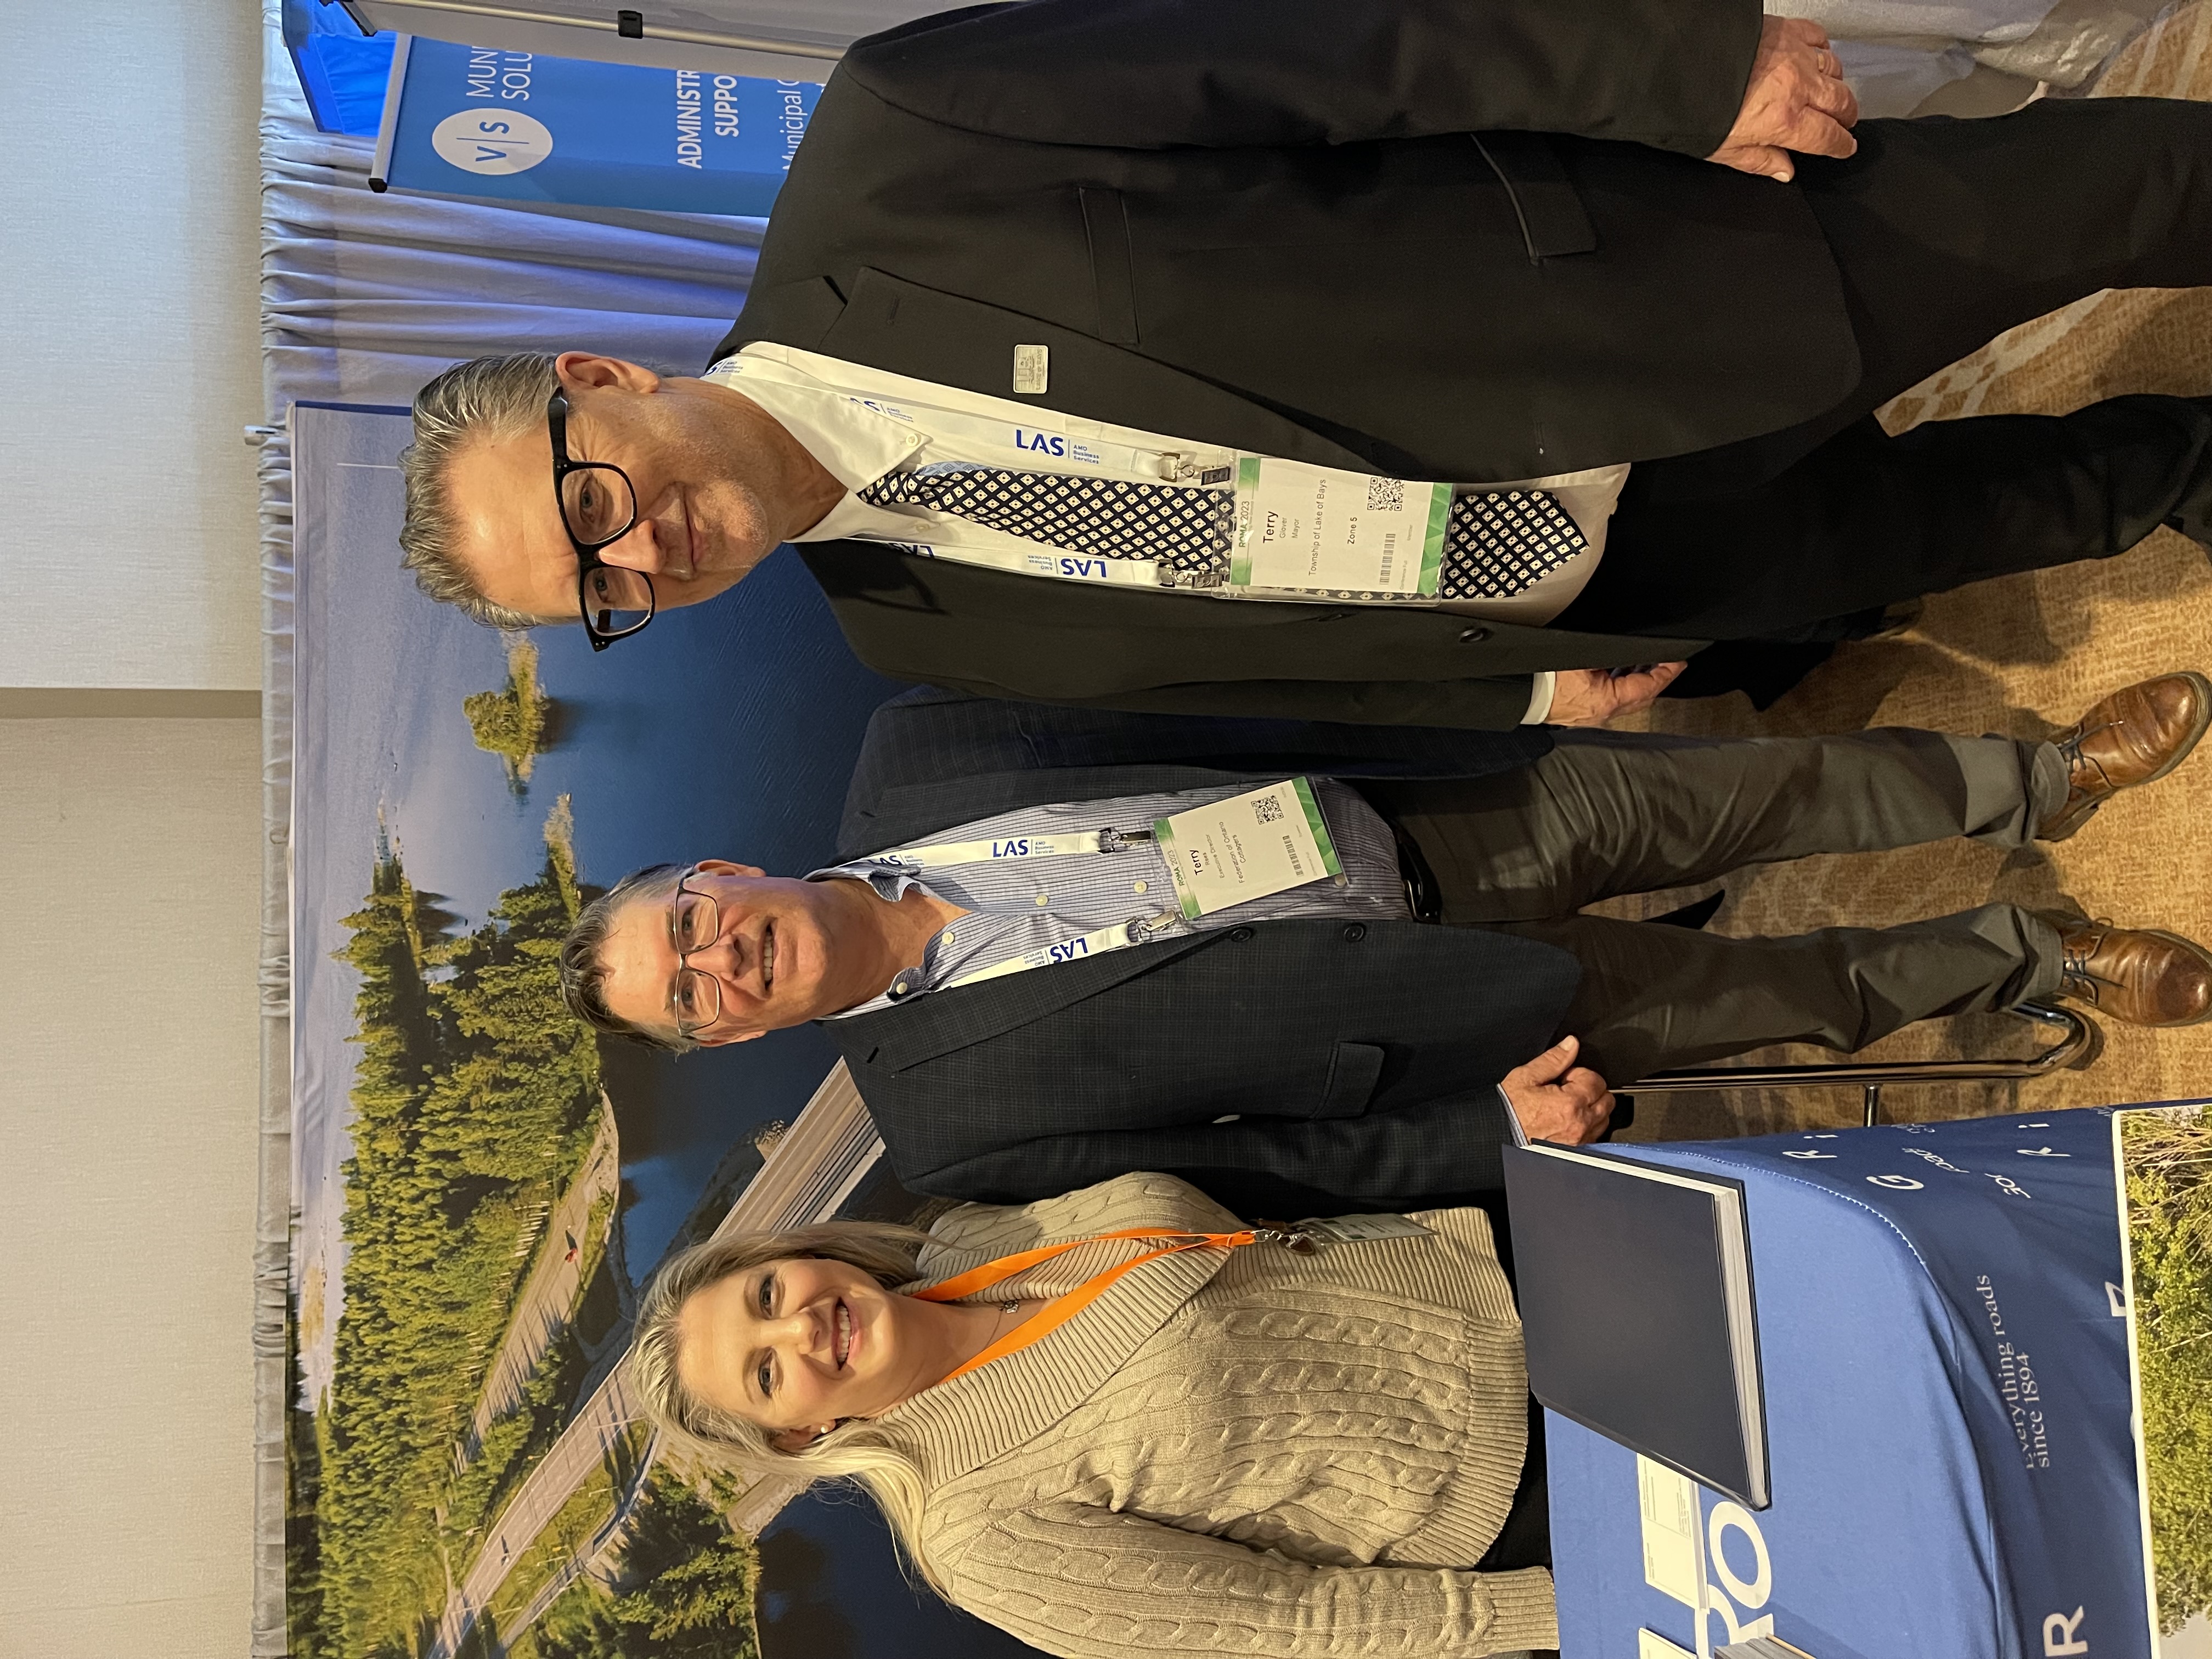 Mayor Terry Glover with Federation of Cottagers' Association Executive Director Terry Rees and Ontario Good Roads Association Communications and Marketing Manager Rachel Swiednicki